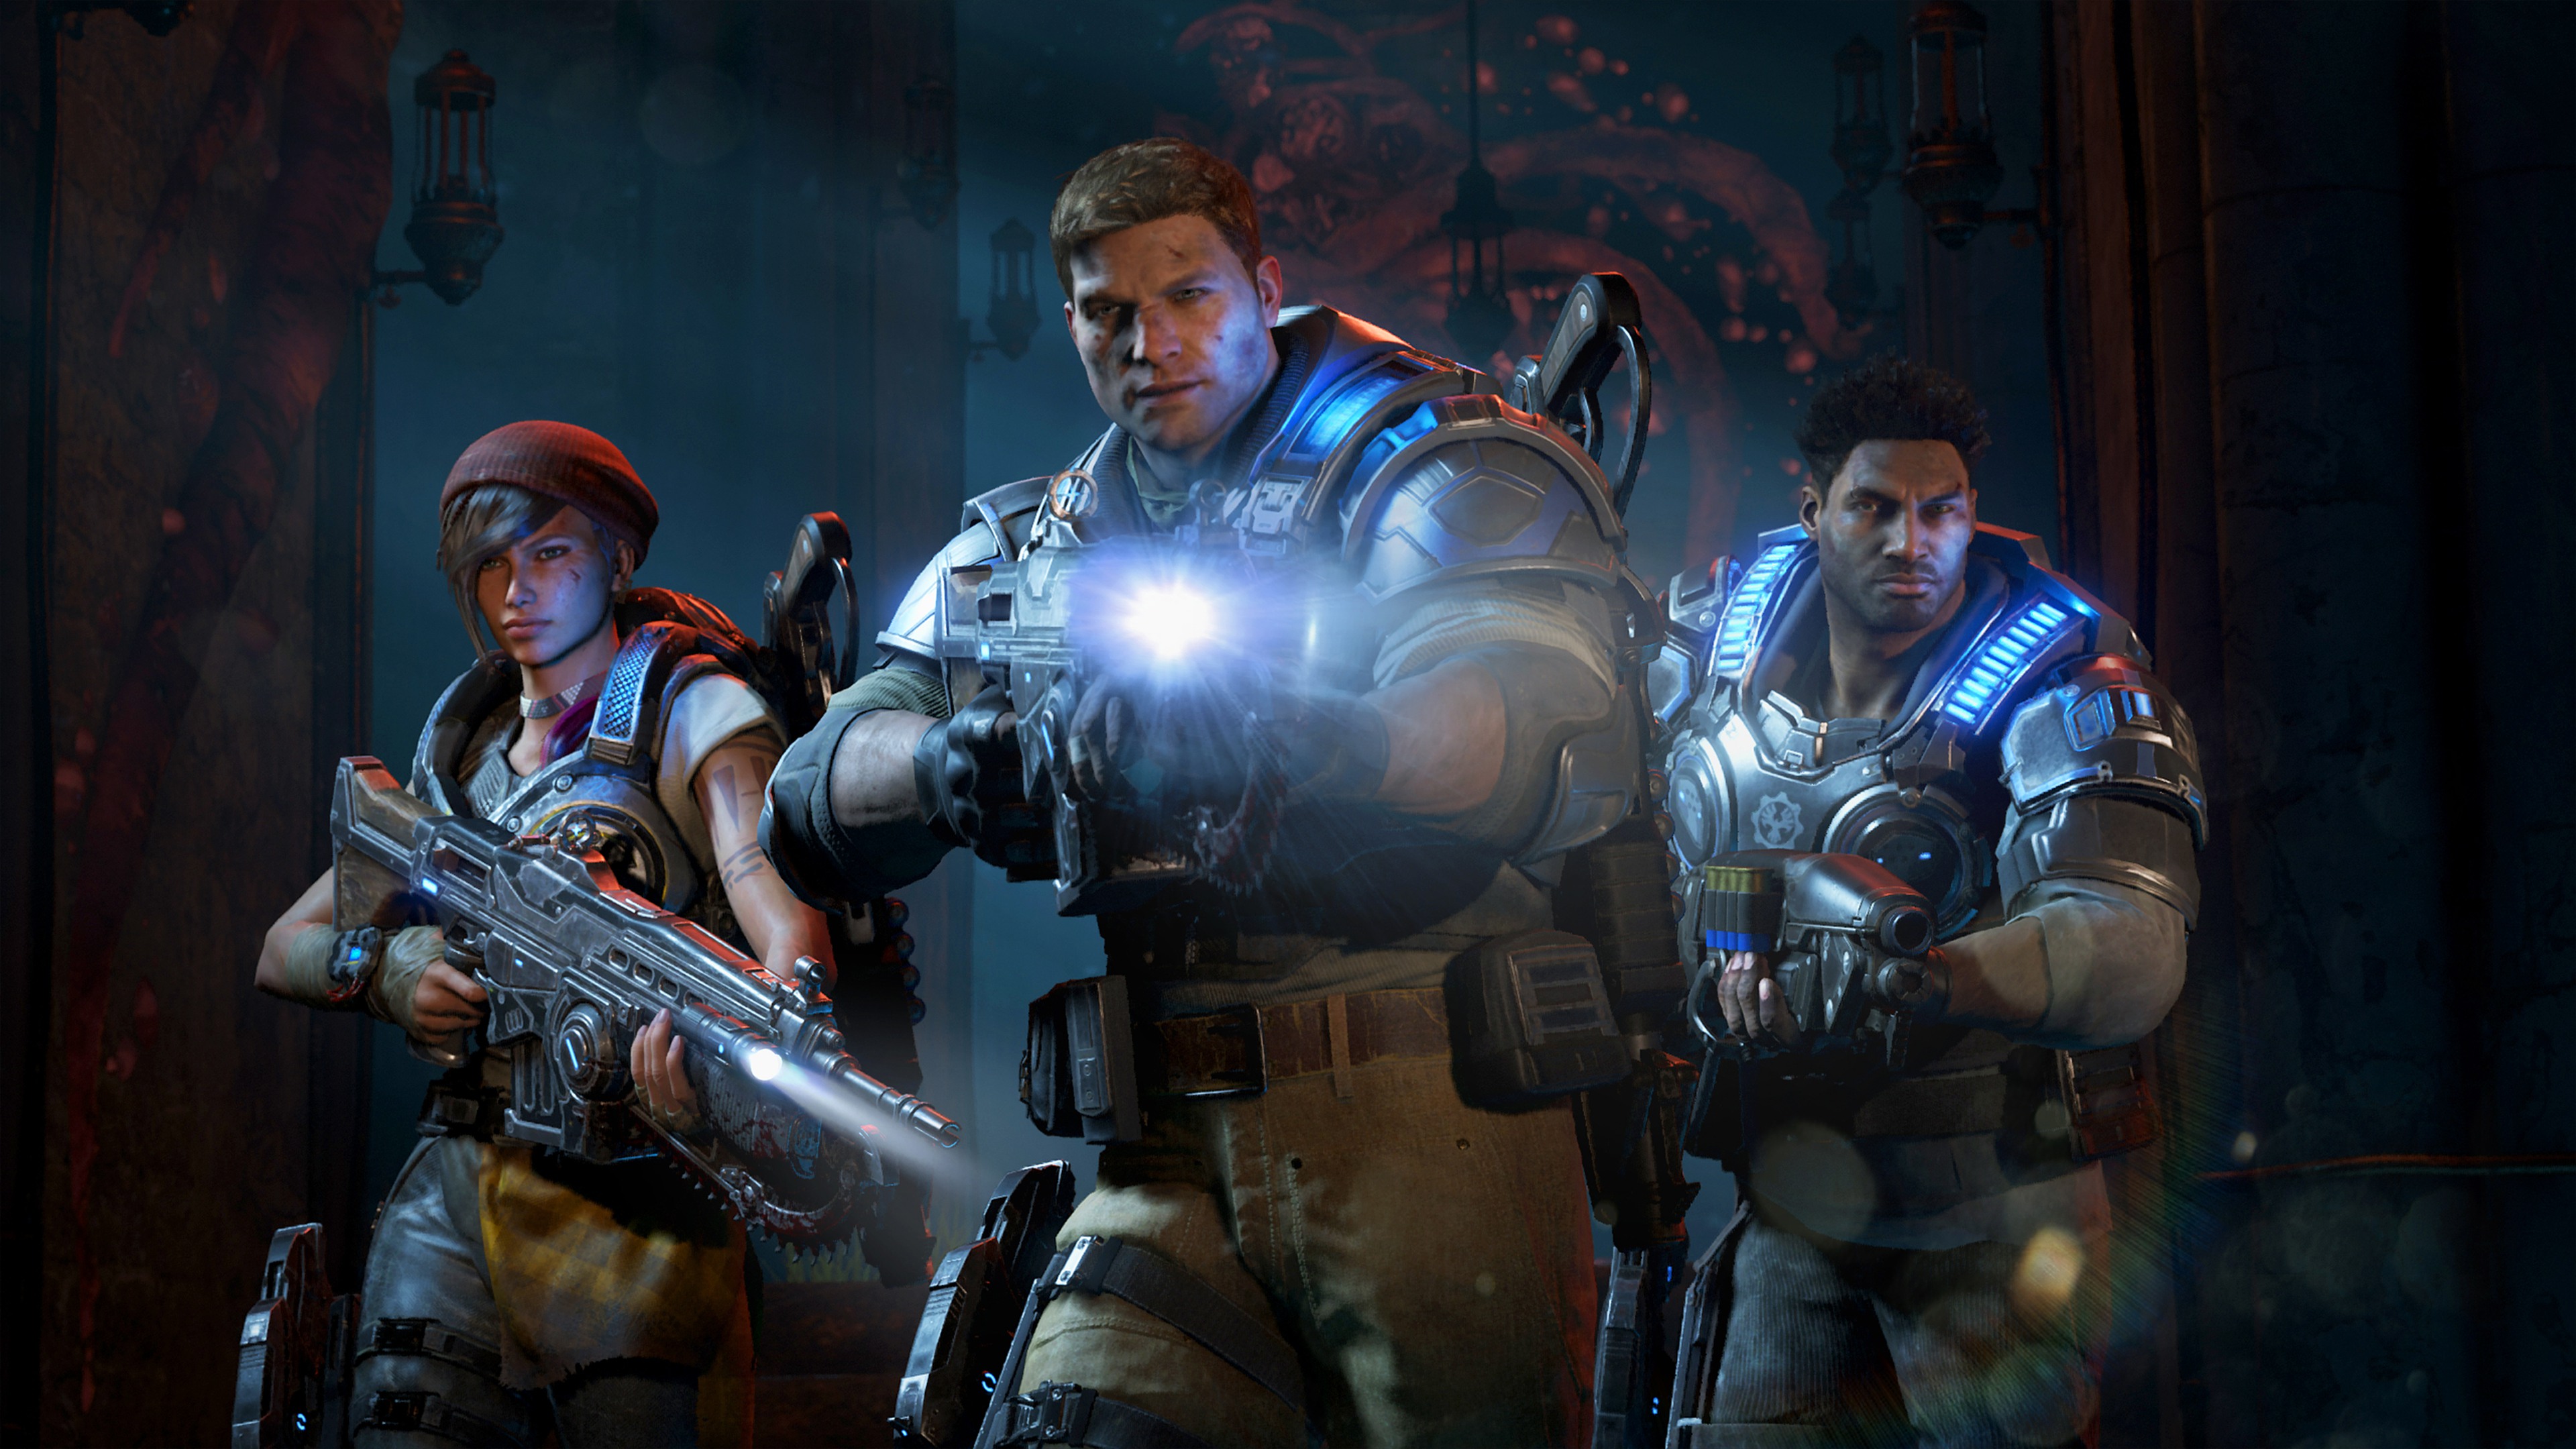 Video Game Gears of War 4 HD Wallpaper | Background Image